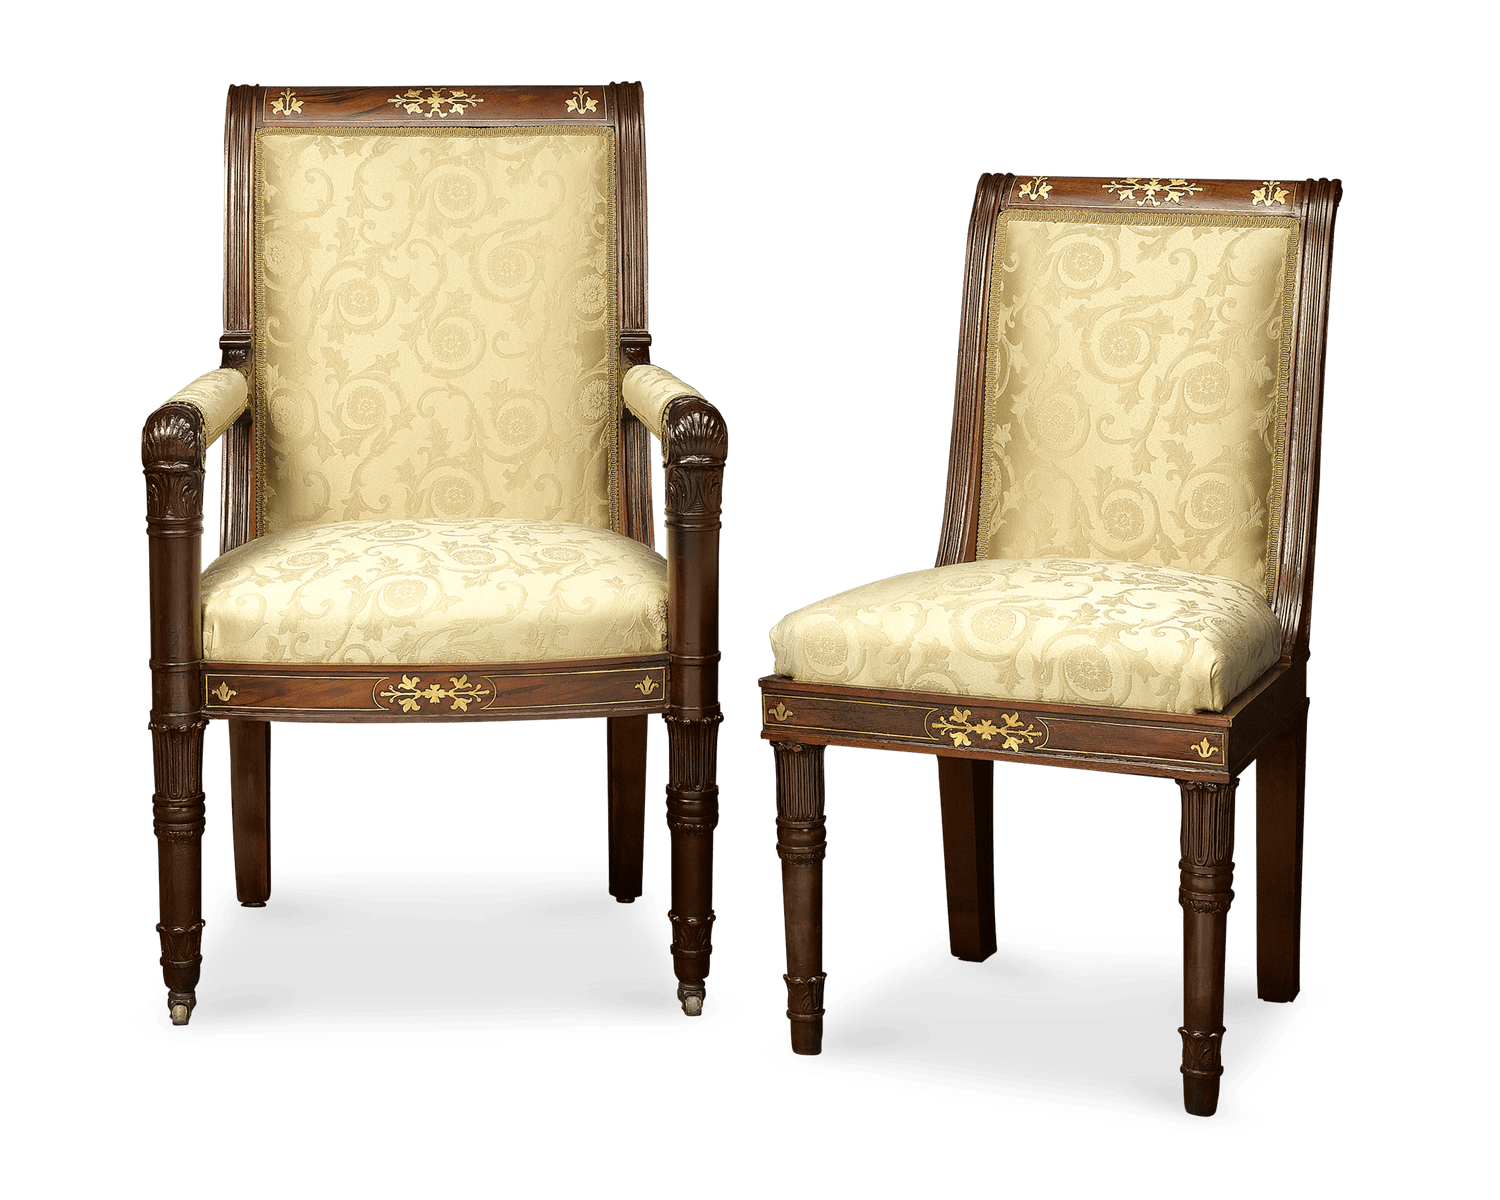 The 12 stately Neoclassical chairs are all upholstered in rich, cream-colored brocade